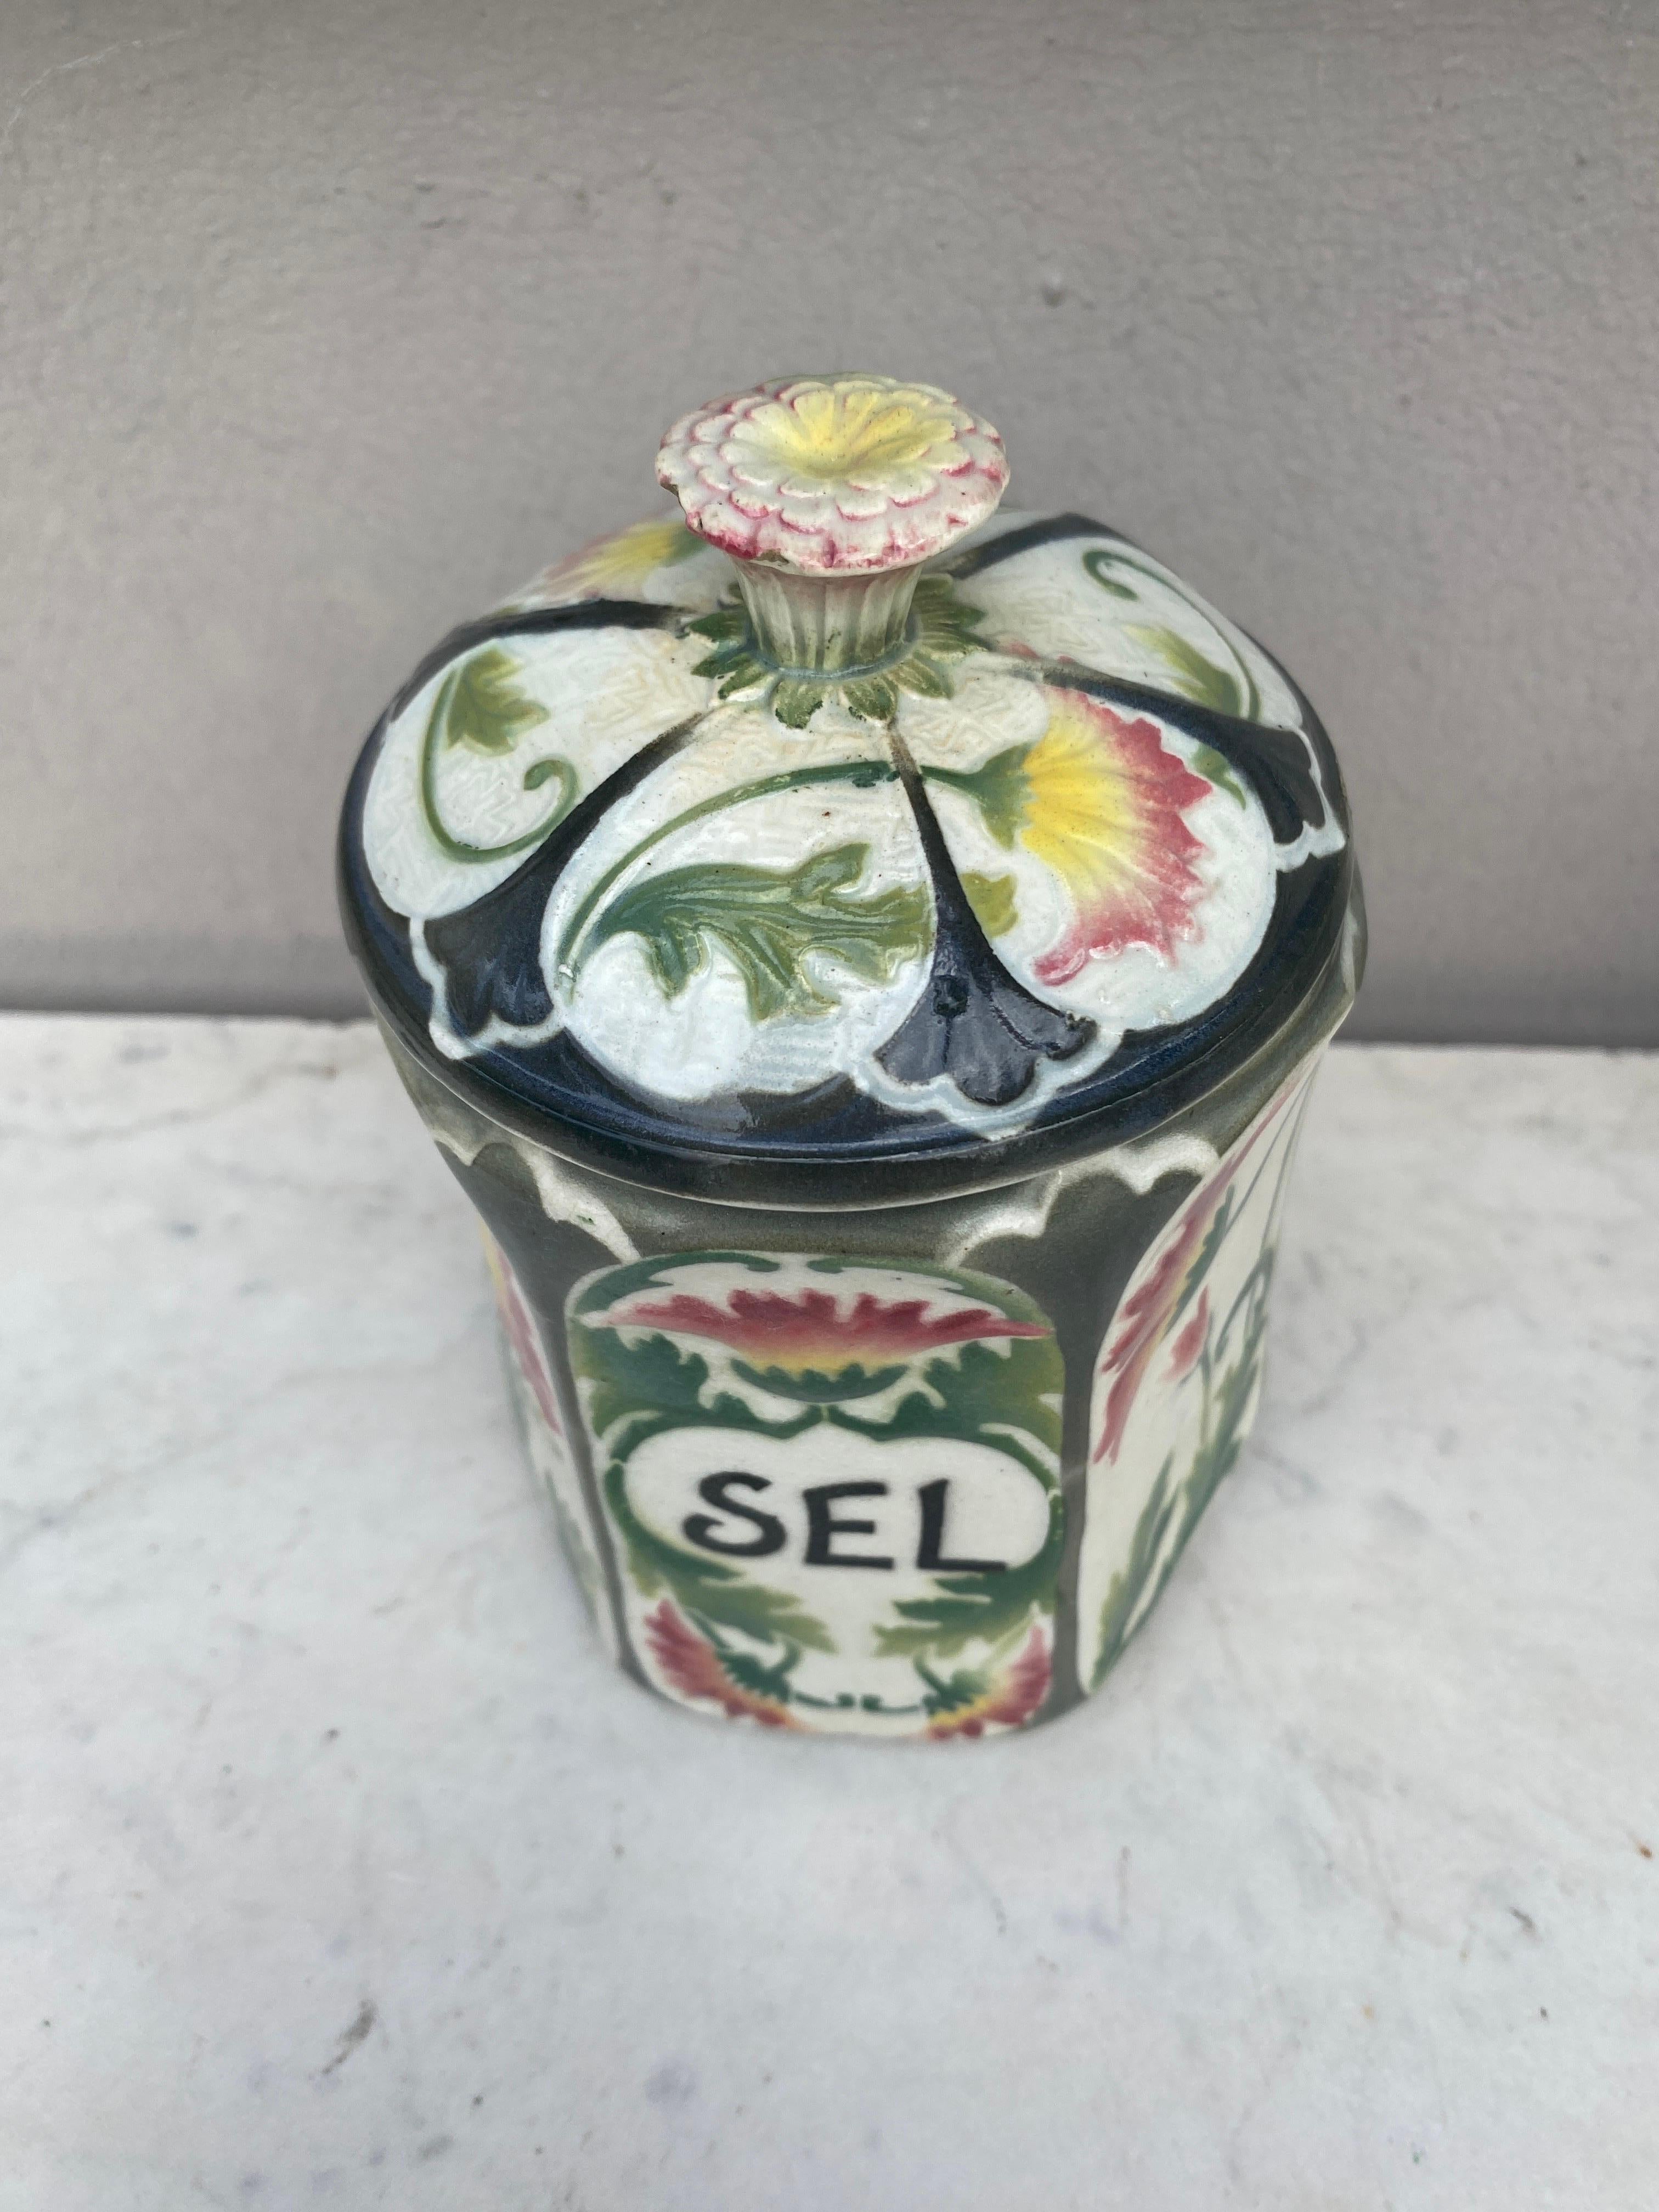 French Majolica Daisies Kitchen Salt Canister signed Saint Clement Keller & Guerin Circa 1900.
H / 6.8 inches.
Salt / Sel in French.